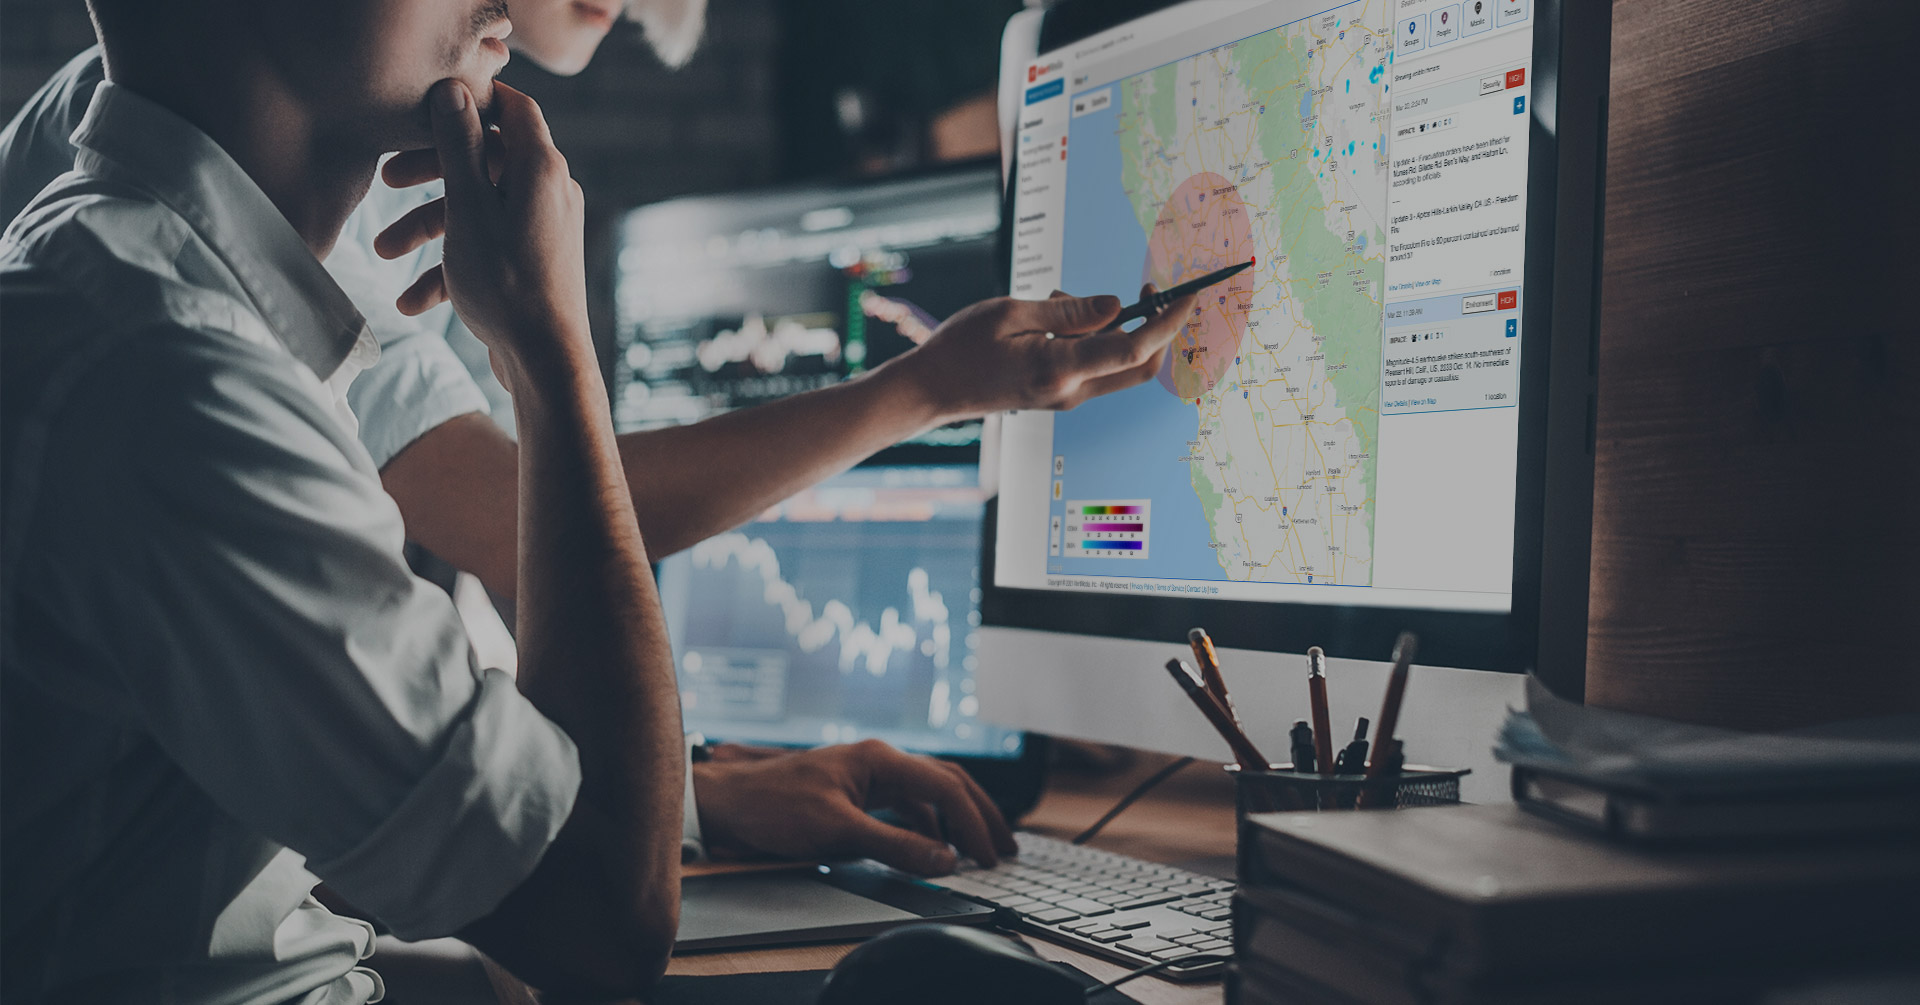 Location Intelligence: What You Need to Know